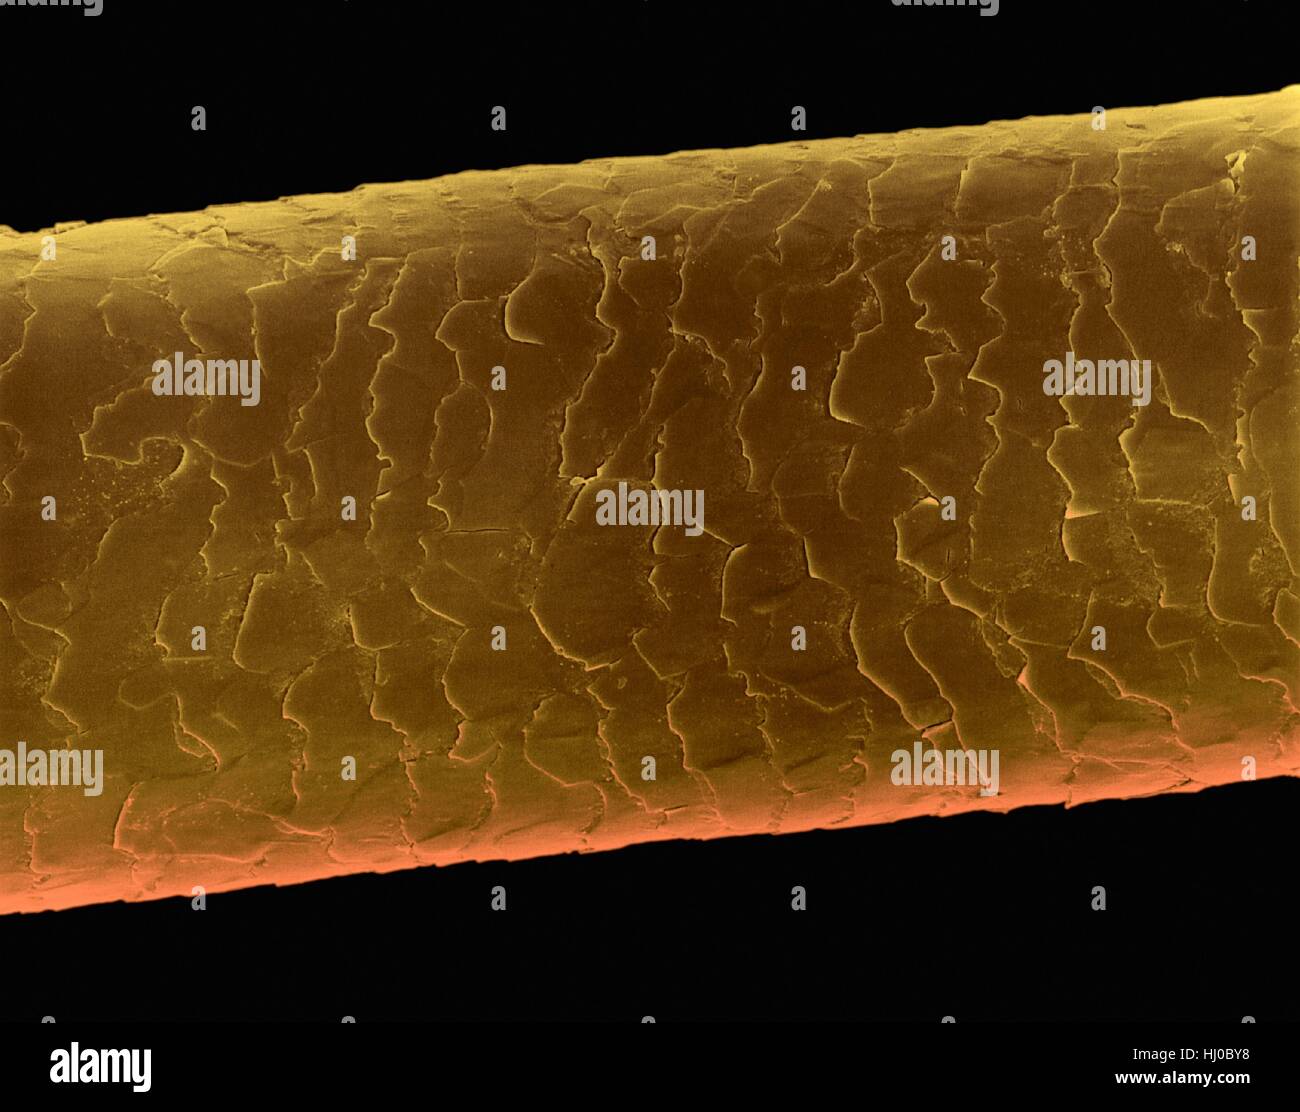 Human hair (Caucasian,brunette),coloured scanning electron micrograph (SEM).The outer layer of hair (the cuticle) has overlapping scales of keratin.These scales are thought to prevent hairs from matting together.Hair is made up of fibrous protein called keratin.Internally hair shaft is divided into Stock Photo